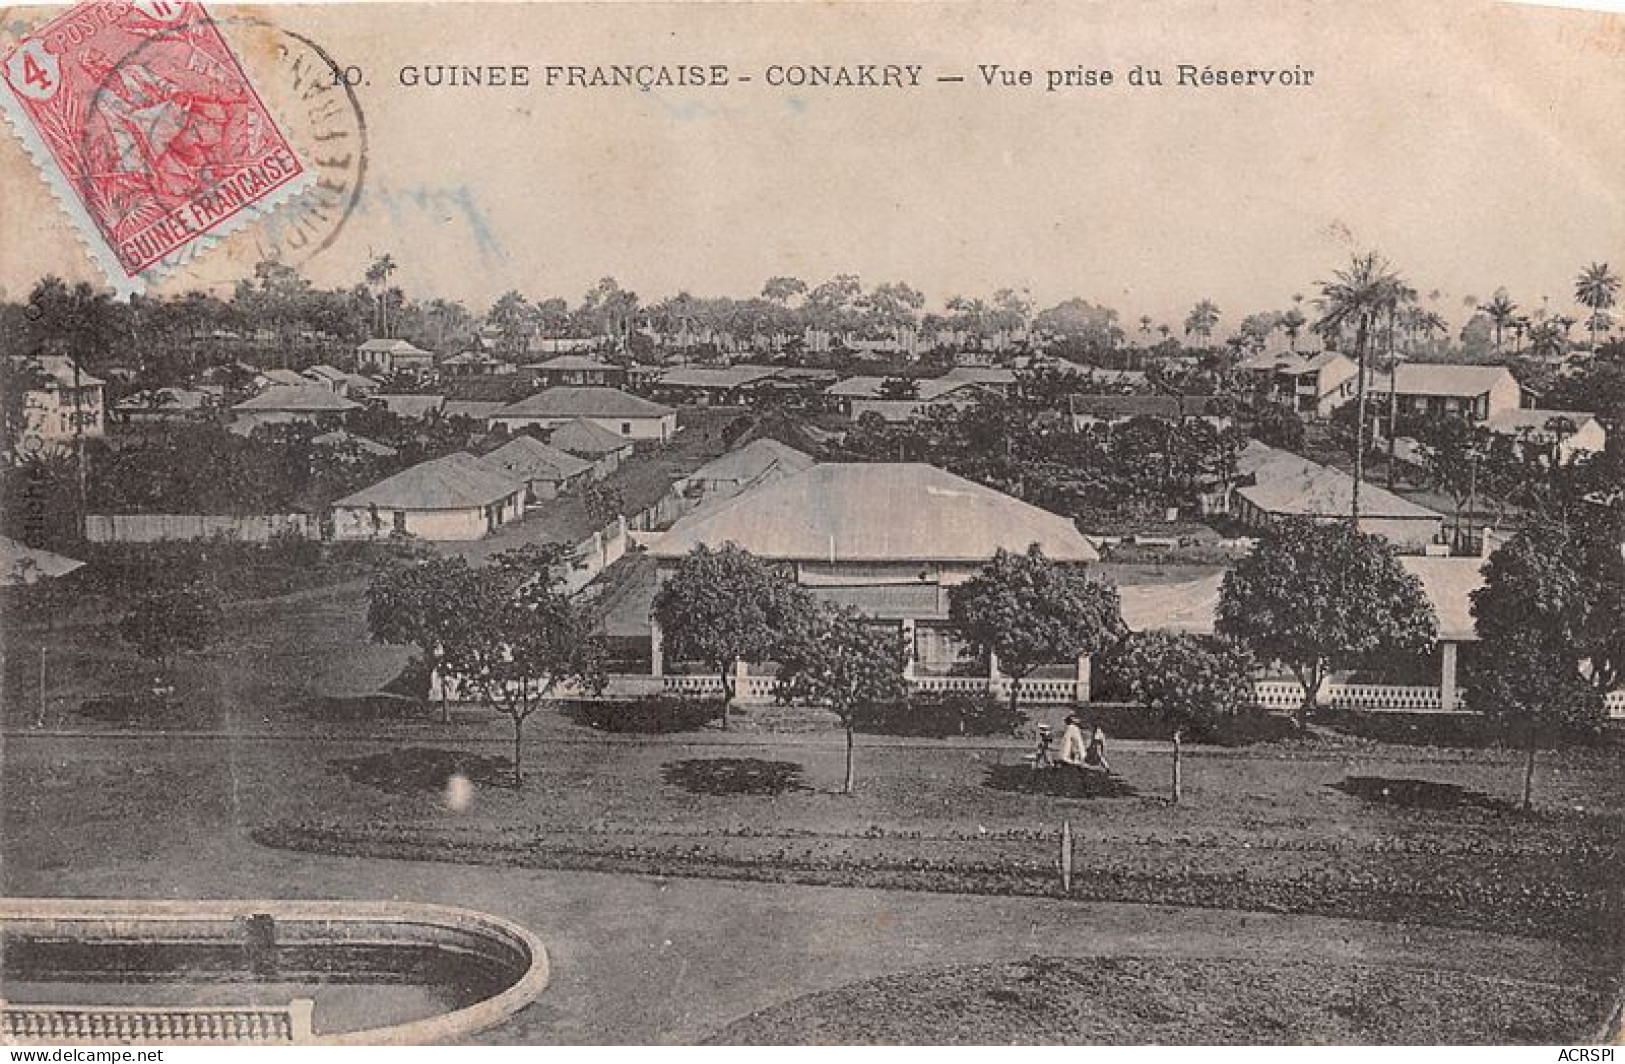 GUINEE FRANCAISE CONAKRY Vue Prise Du Reservoir 12(scan Recto-verso) MA1385 - French Guinea